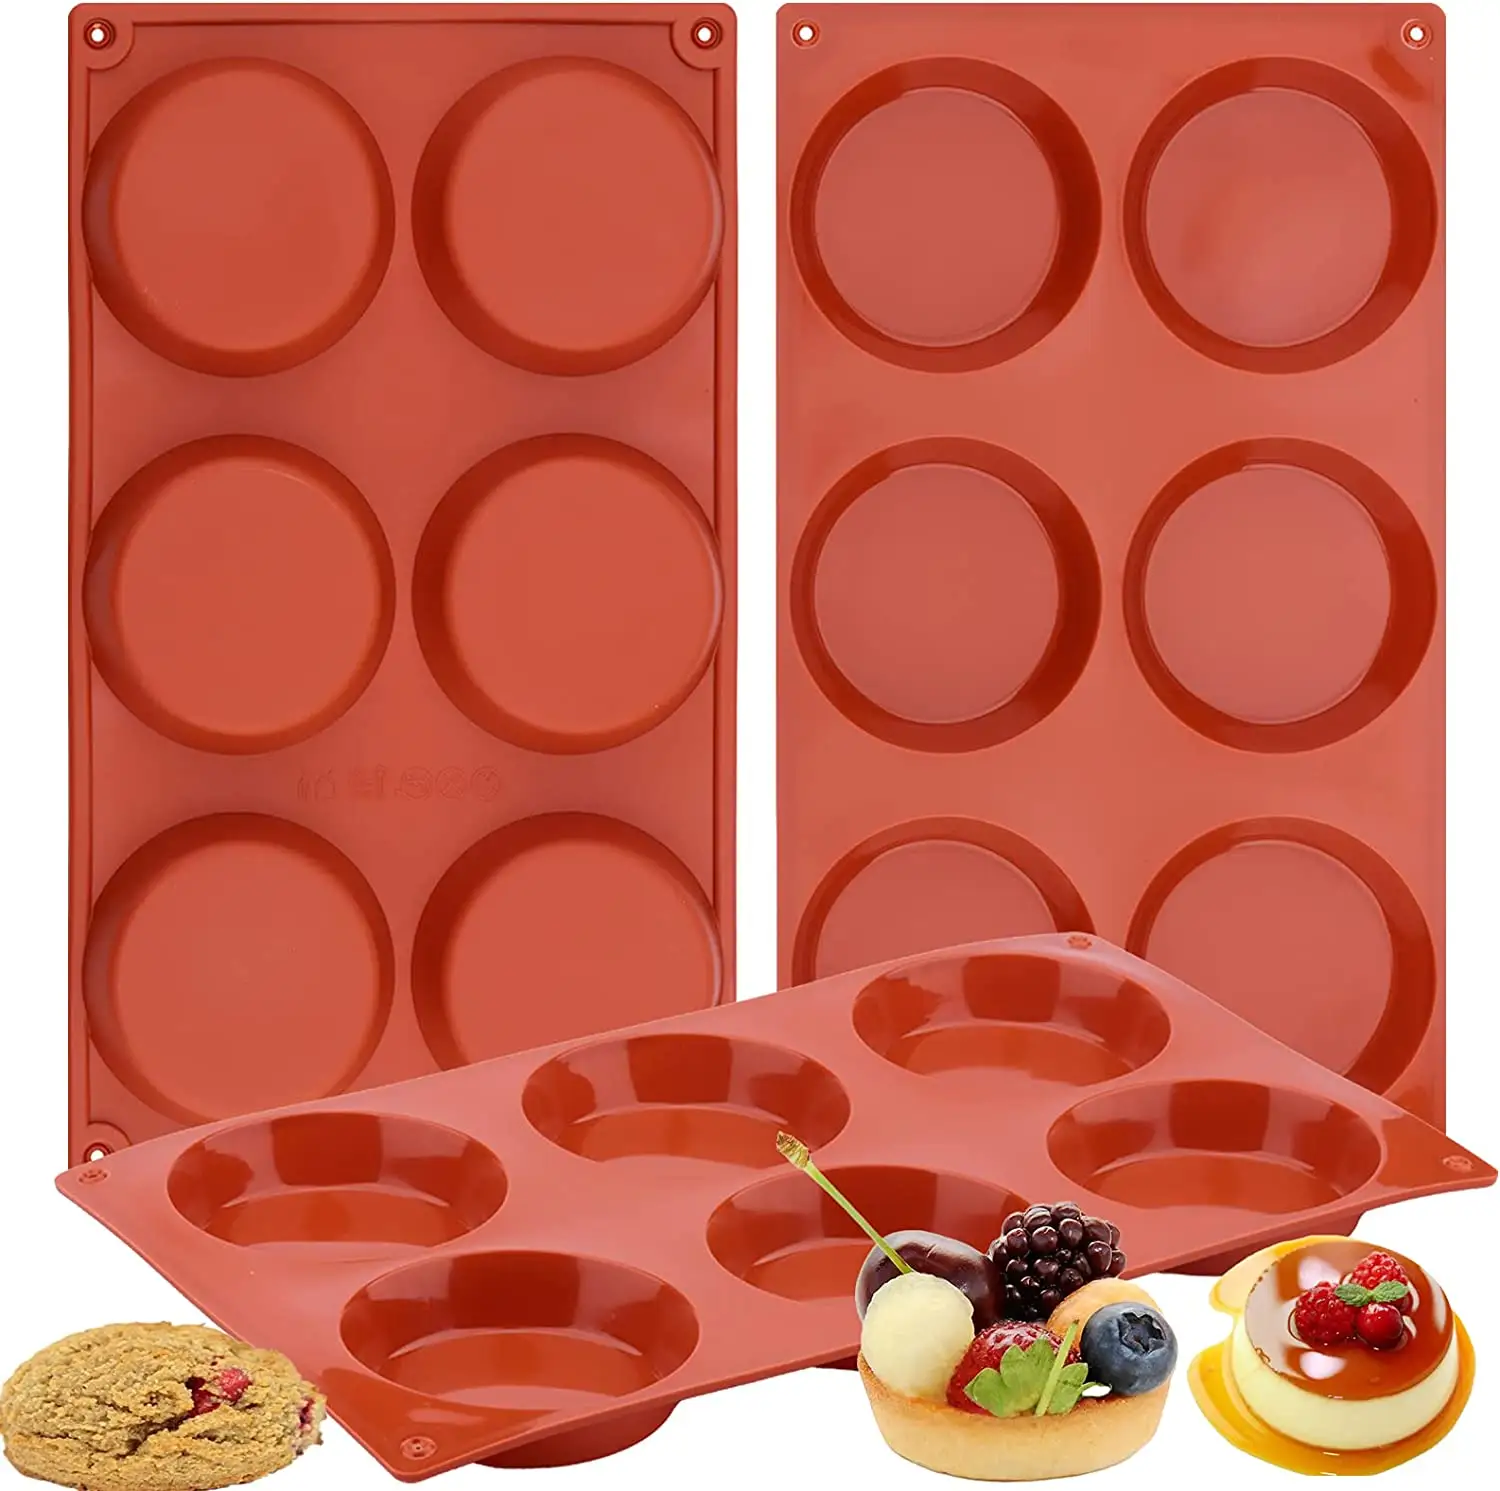 Silicone Muffin Top Pans for Baking/Non-Stick 3" Round Silicone Mold for Corn Bread, Eggs, 6 Cavities Whoopie Pie Pan